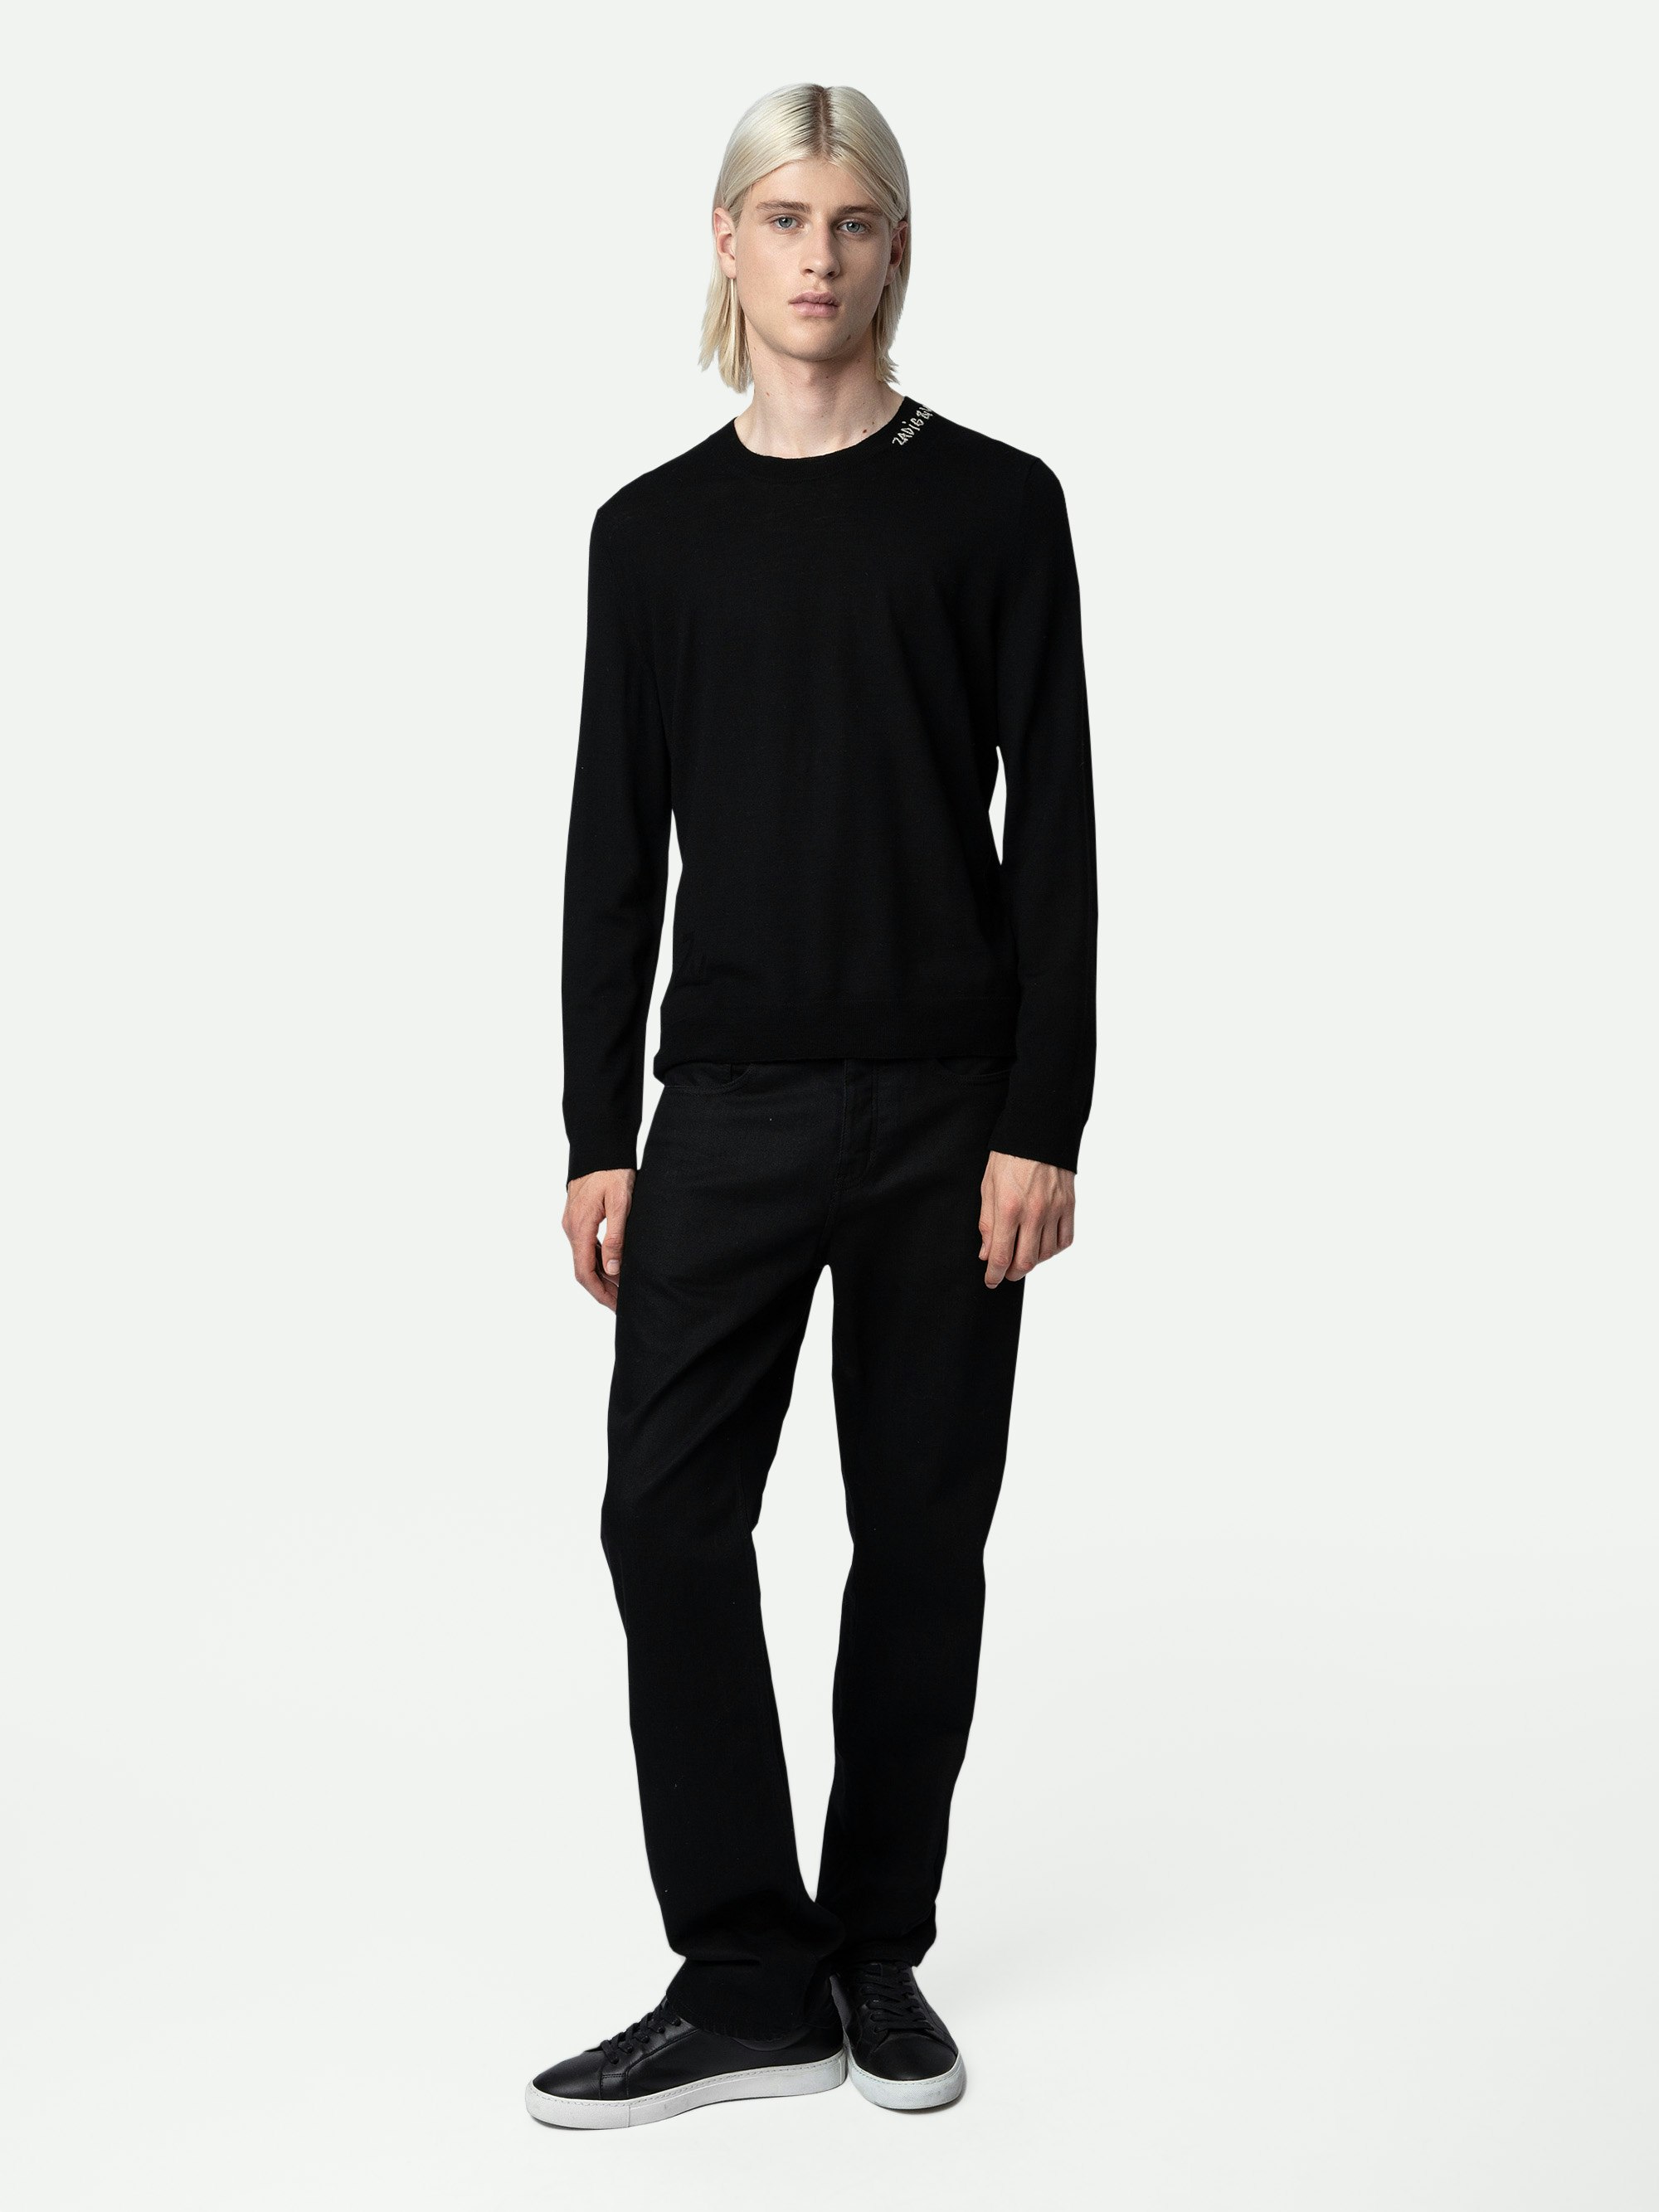 Kennedy Sweater 100% Merino Wool - Men’s black 100% merino wool sweater with Zadig&Voltaire embroidery on the neckline.